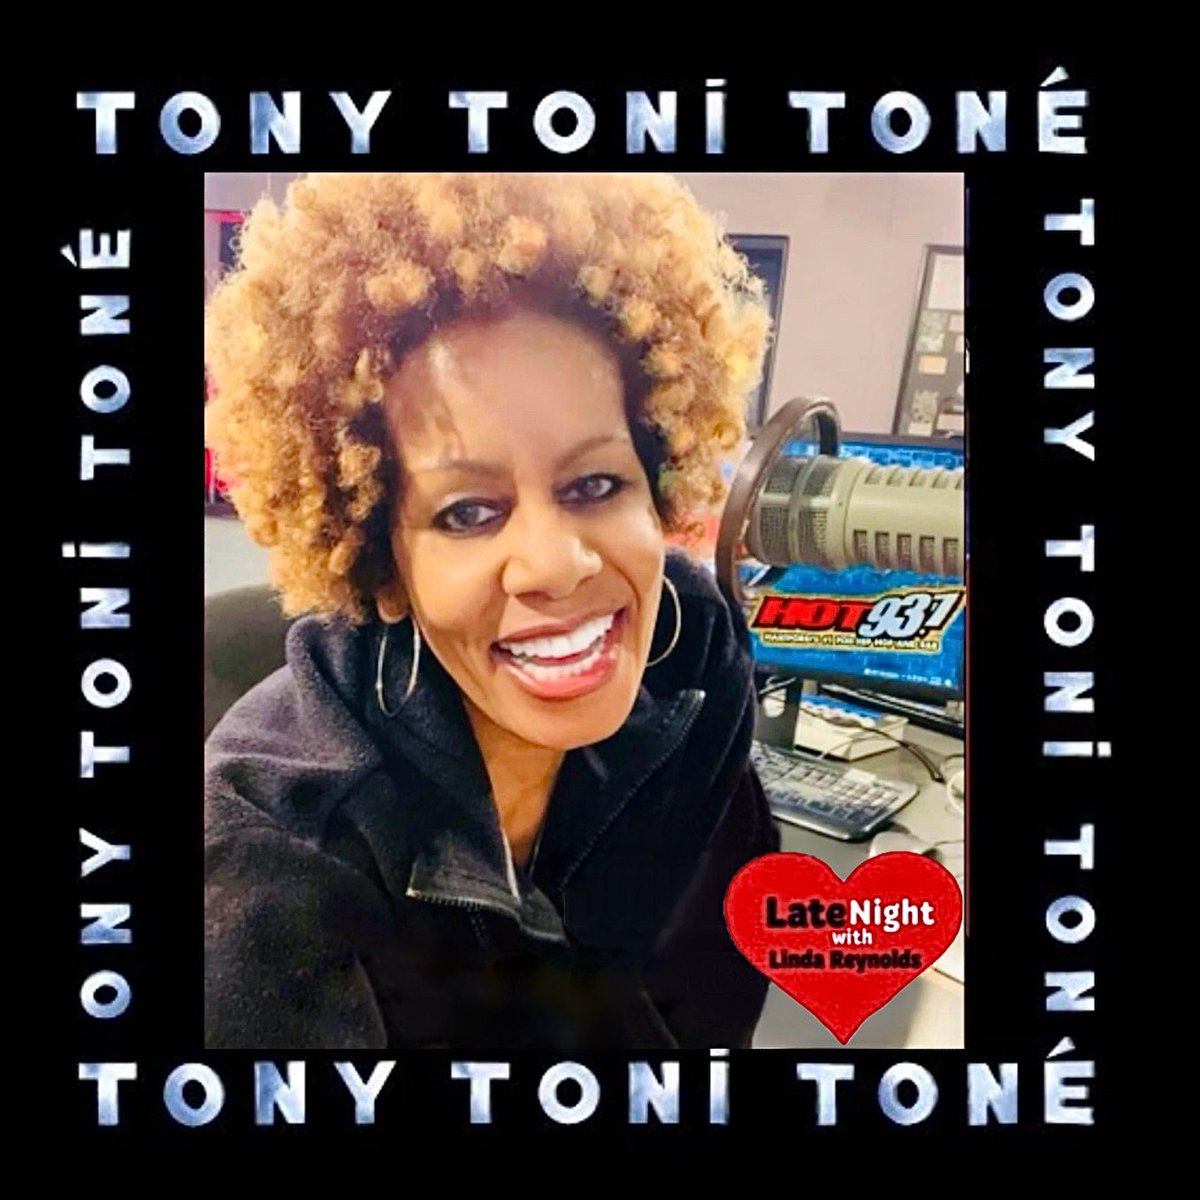 At 10 tonight @hot937 #LateNightLove begins with @TonyToniTone1 #WhateverYouWant released in 1990 Shouts/Requests hot937.com, On Air #LindaReynolds page #ListenLive on the Audacy app.